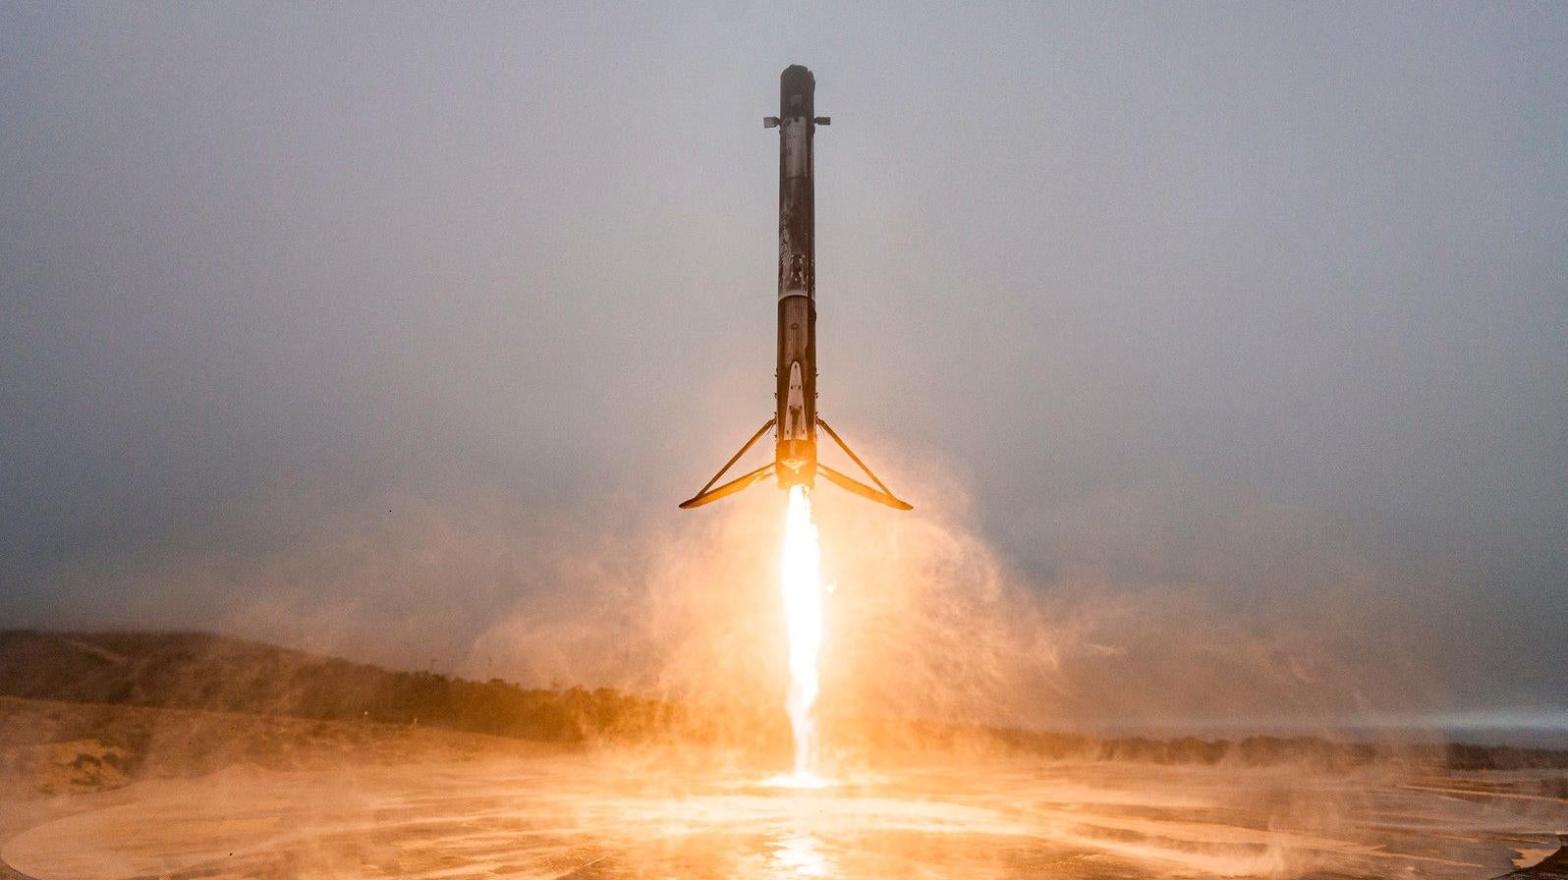 SpaceX's Falcon 9 rocket launched Germany's SARah 1 military imaging satellite into orbit on June 18. (Photo: SpaceX)